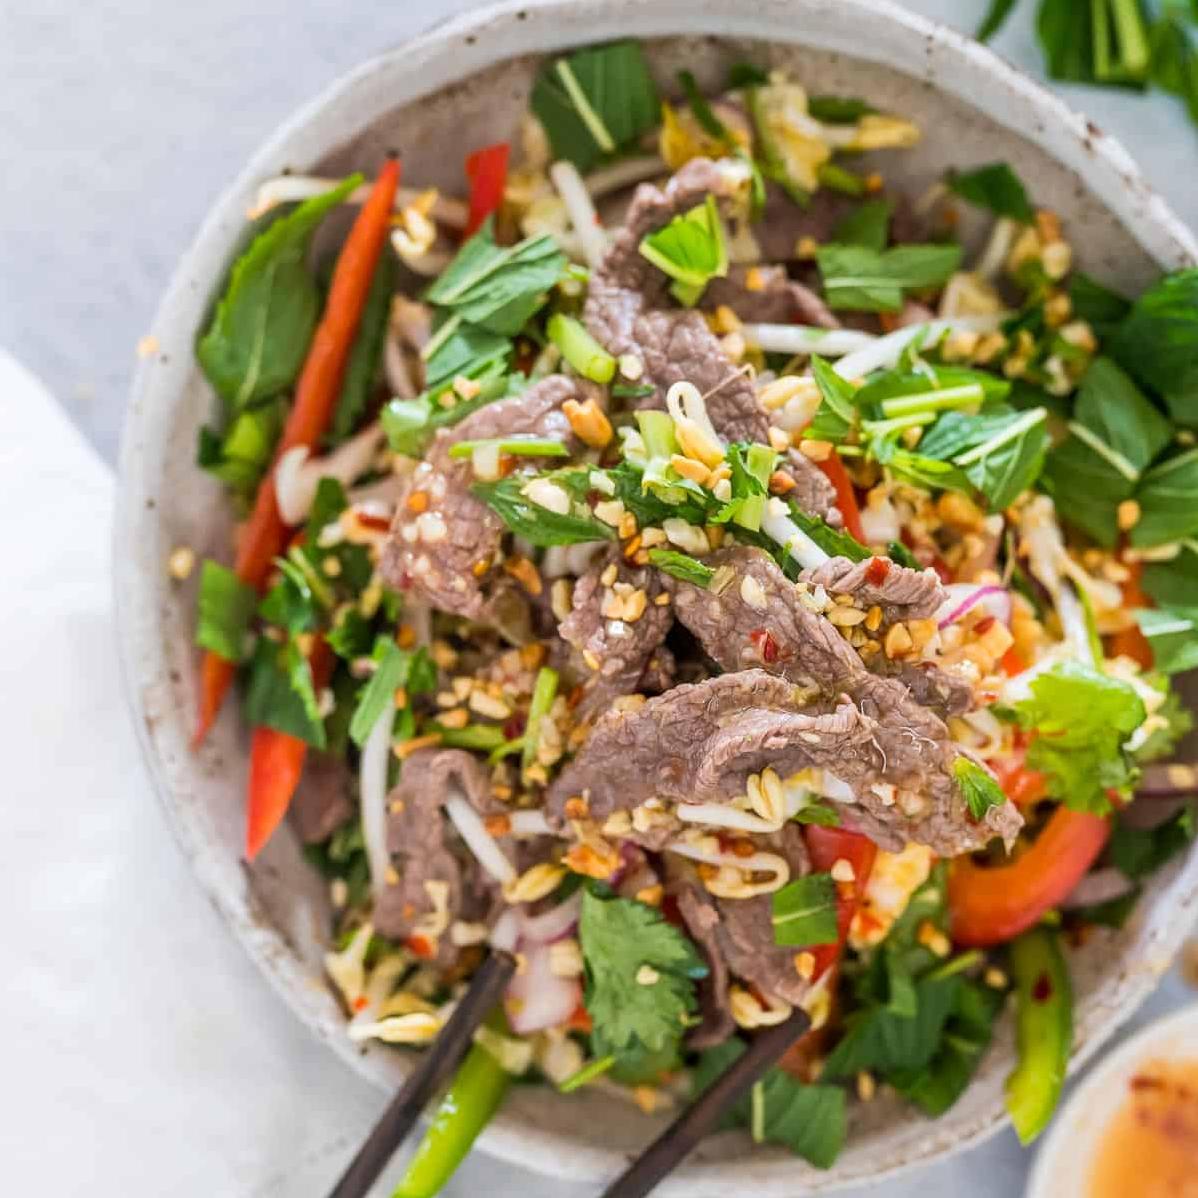  Tender, juicy beef strips mingle with mint, lettuce, and other savory toppings in this Vietnamese salad.